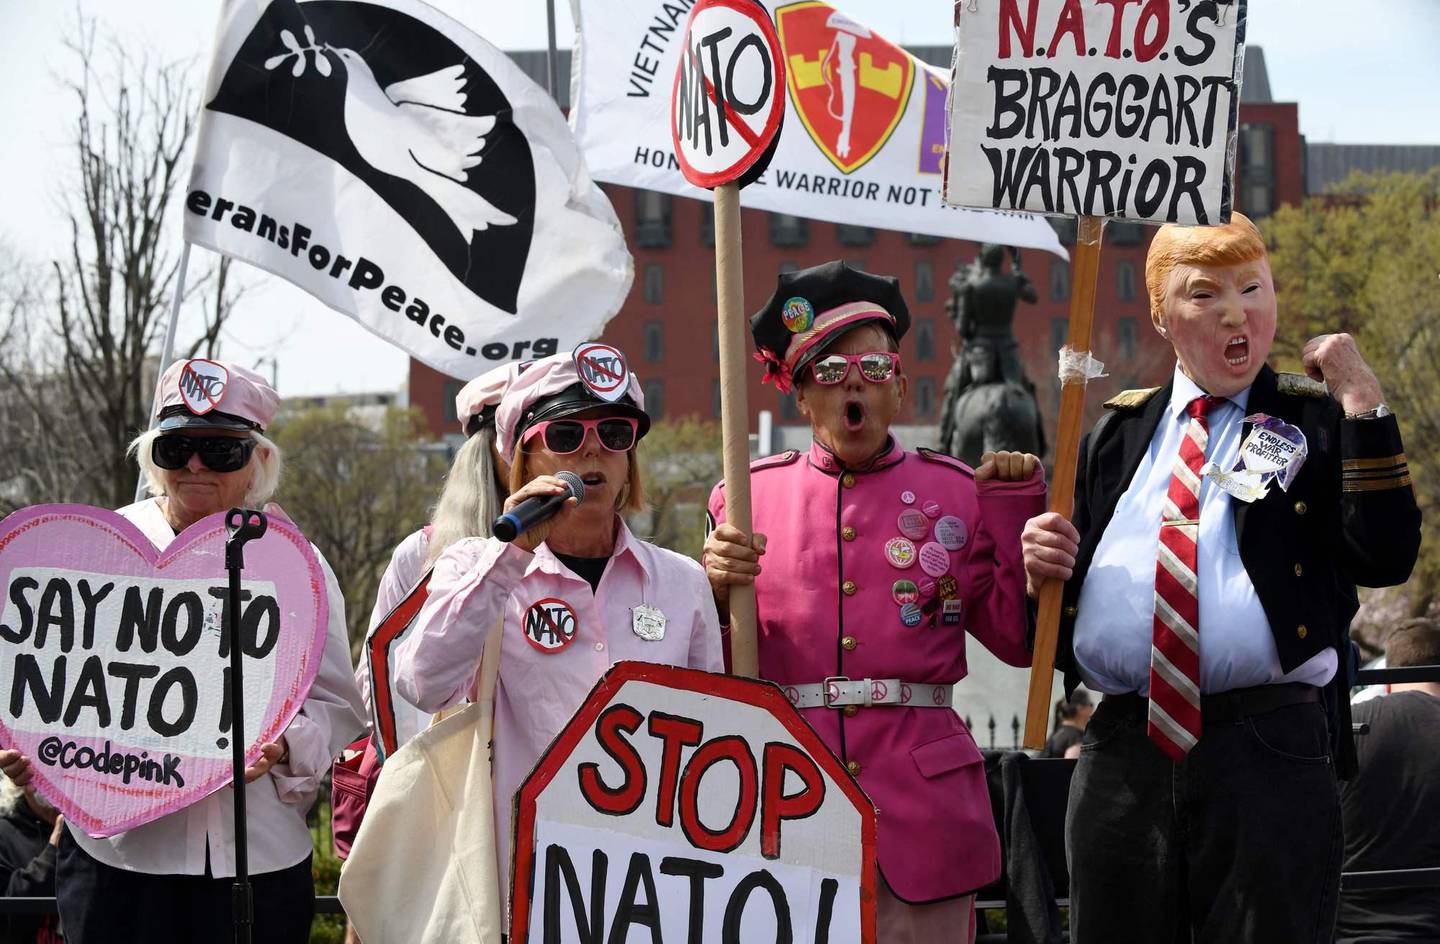 Activists rally in Lafayette Square to protest ahead of the 70th anniversary of the summit meeting of the North Atlantic Treaty Organization (NATO), March 30, 2019 in Washington, DC. - NATO foreign ministers will gather in Washington DC, on April 4, 2019. (Photo by Olivier Douliery / AFP)